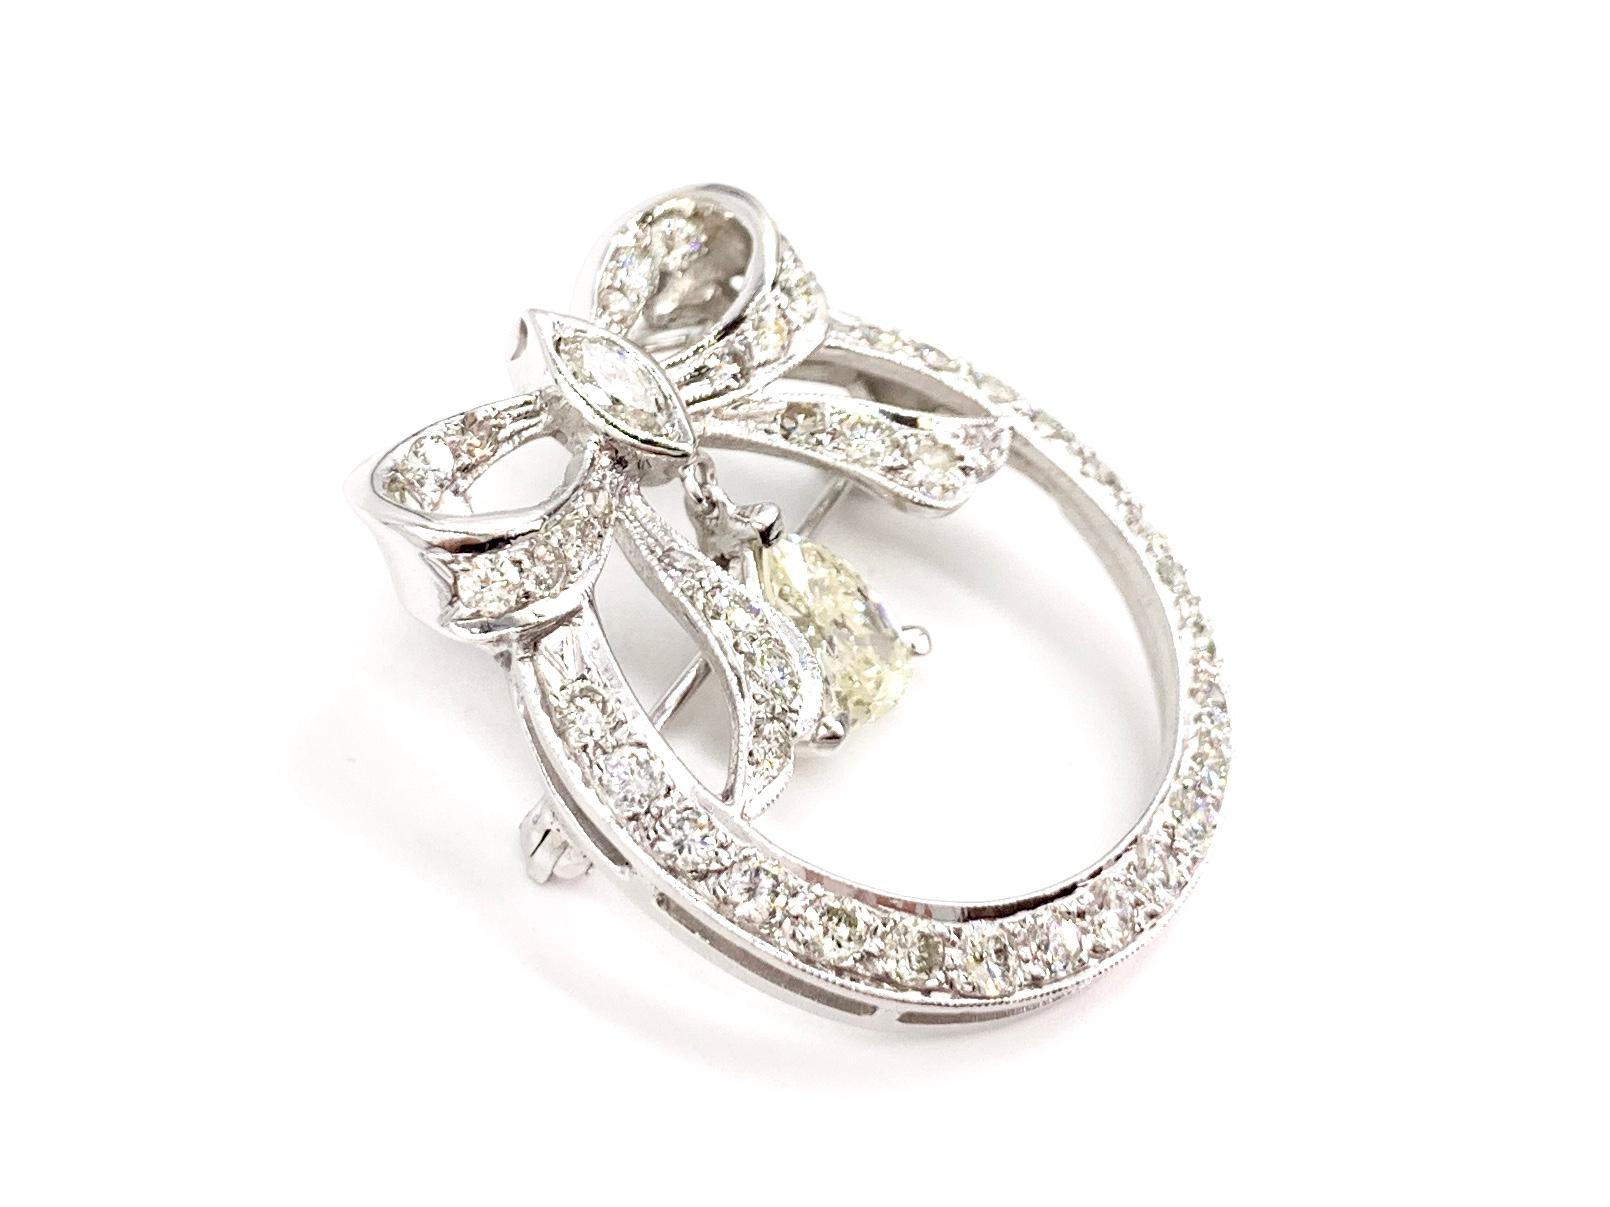 Beautiful Edwardian inspired 14 karat white gold and diamond vintage bow brooch that is fixed with two stationary jump rings so it can also be worn as a pendant - composed of approximately 2.50 carats diamond total weight. Open circle design